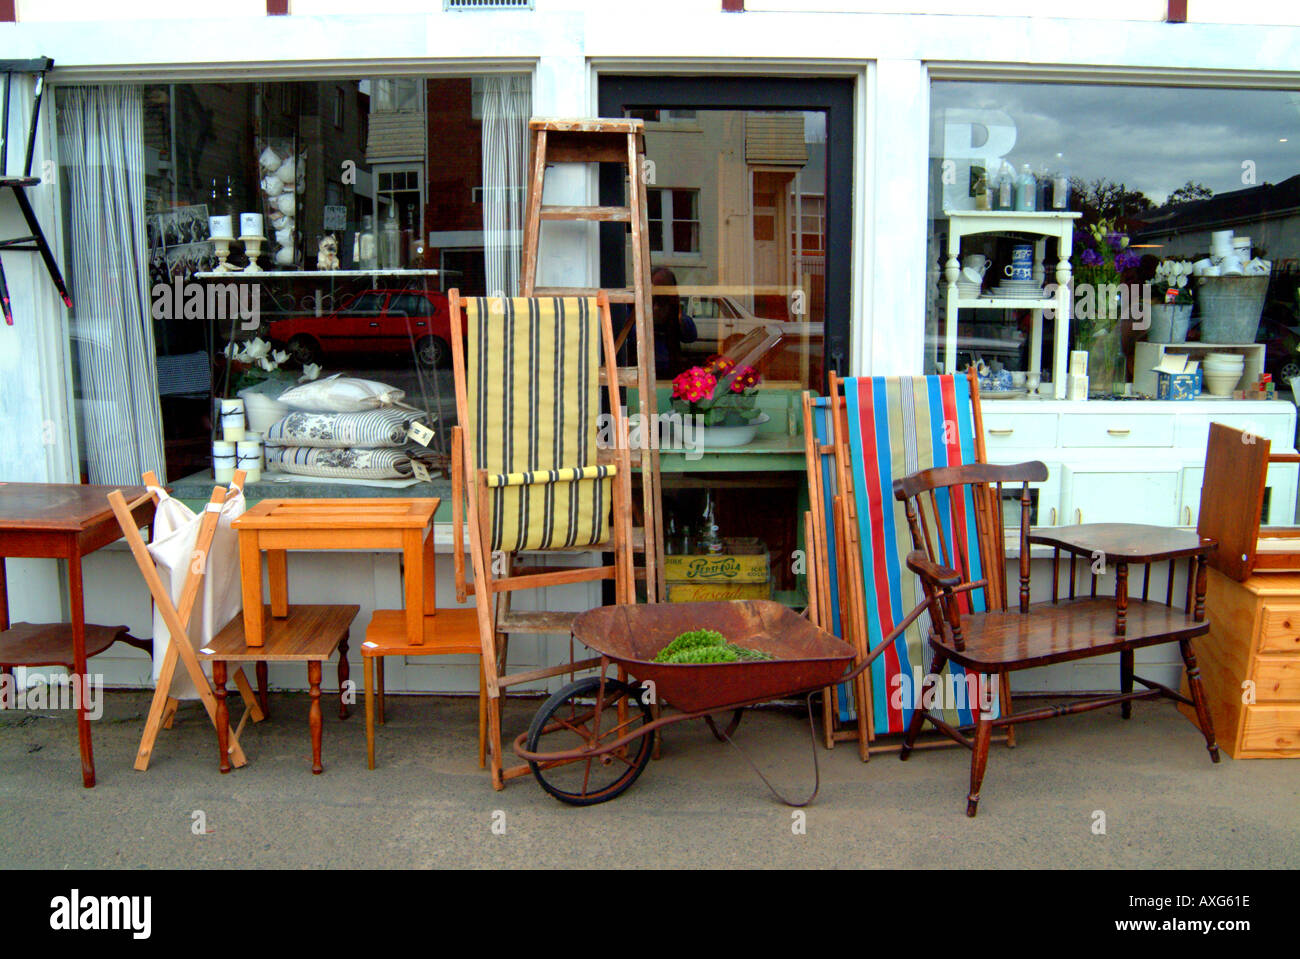 Antiques and bric a brac outside secondhand store Stock Photo